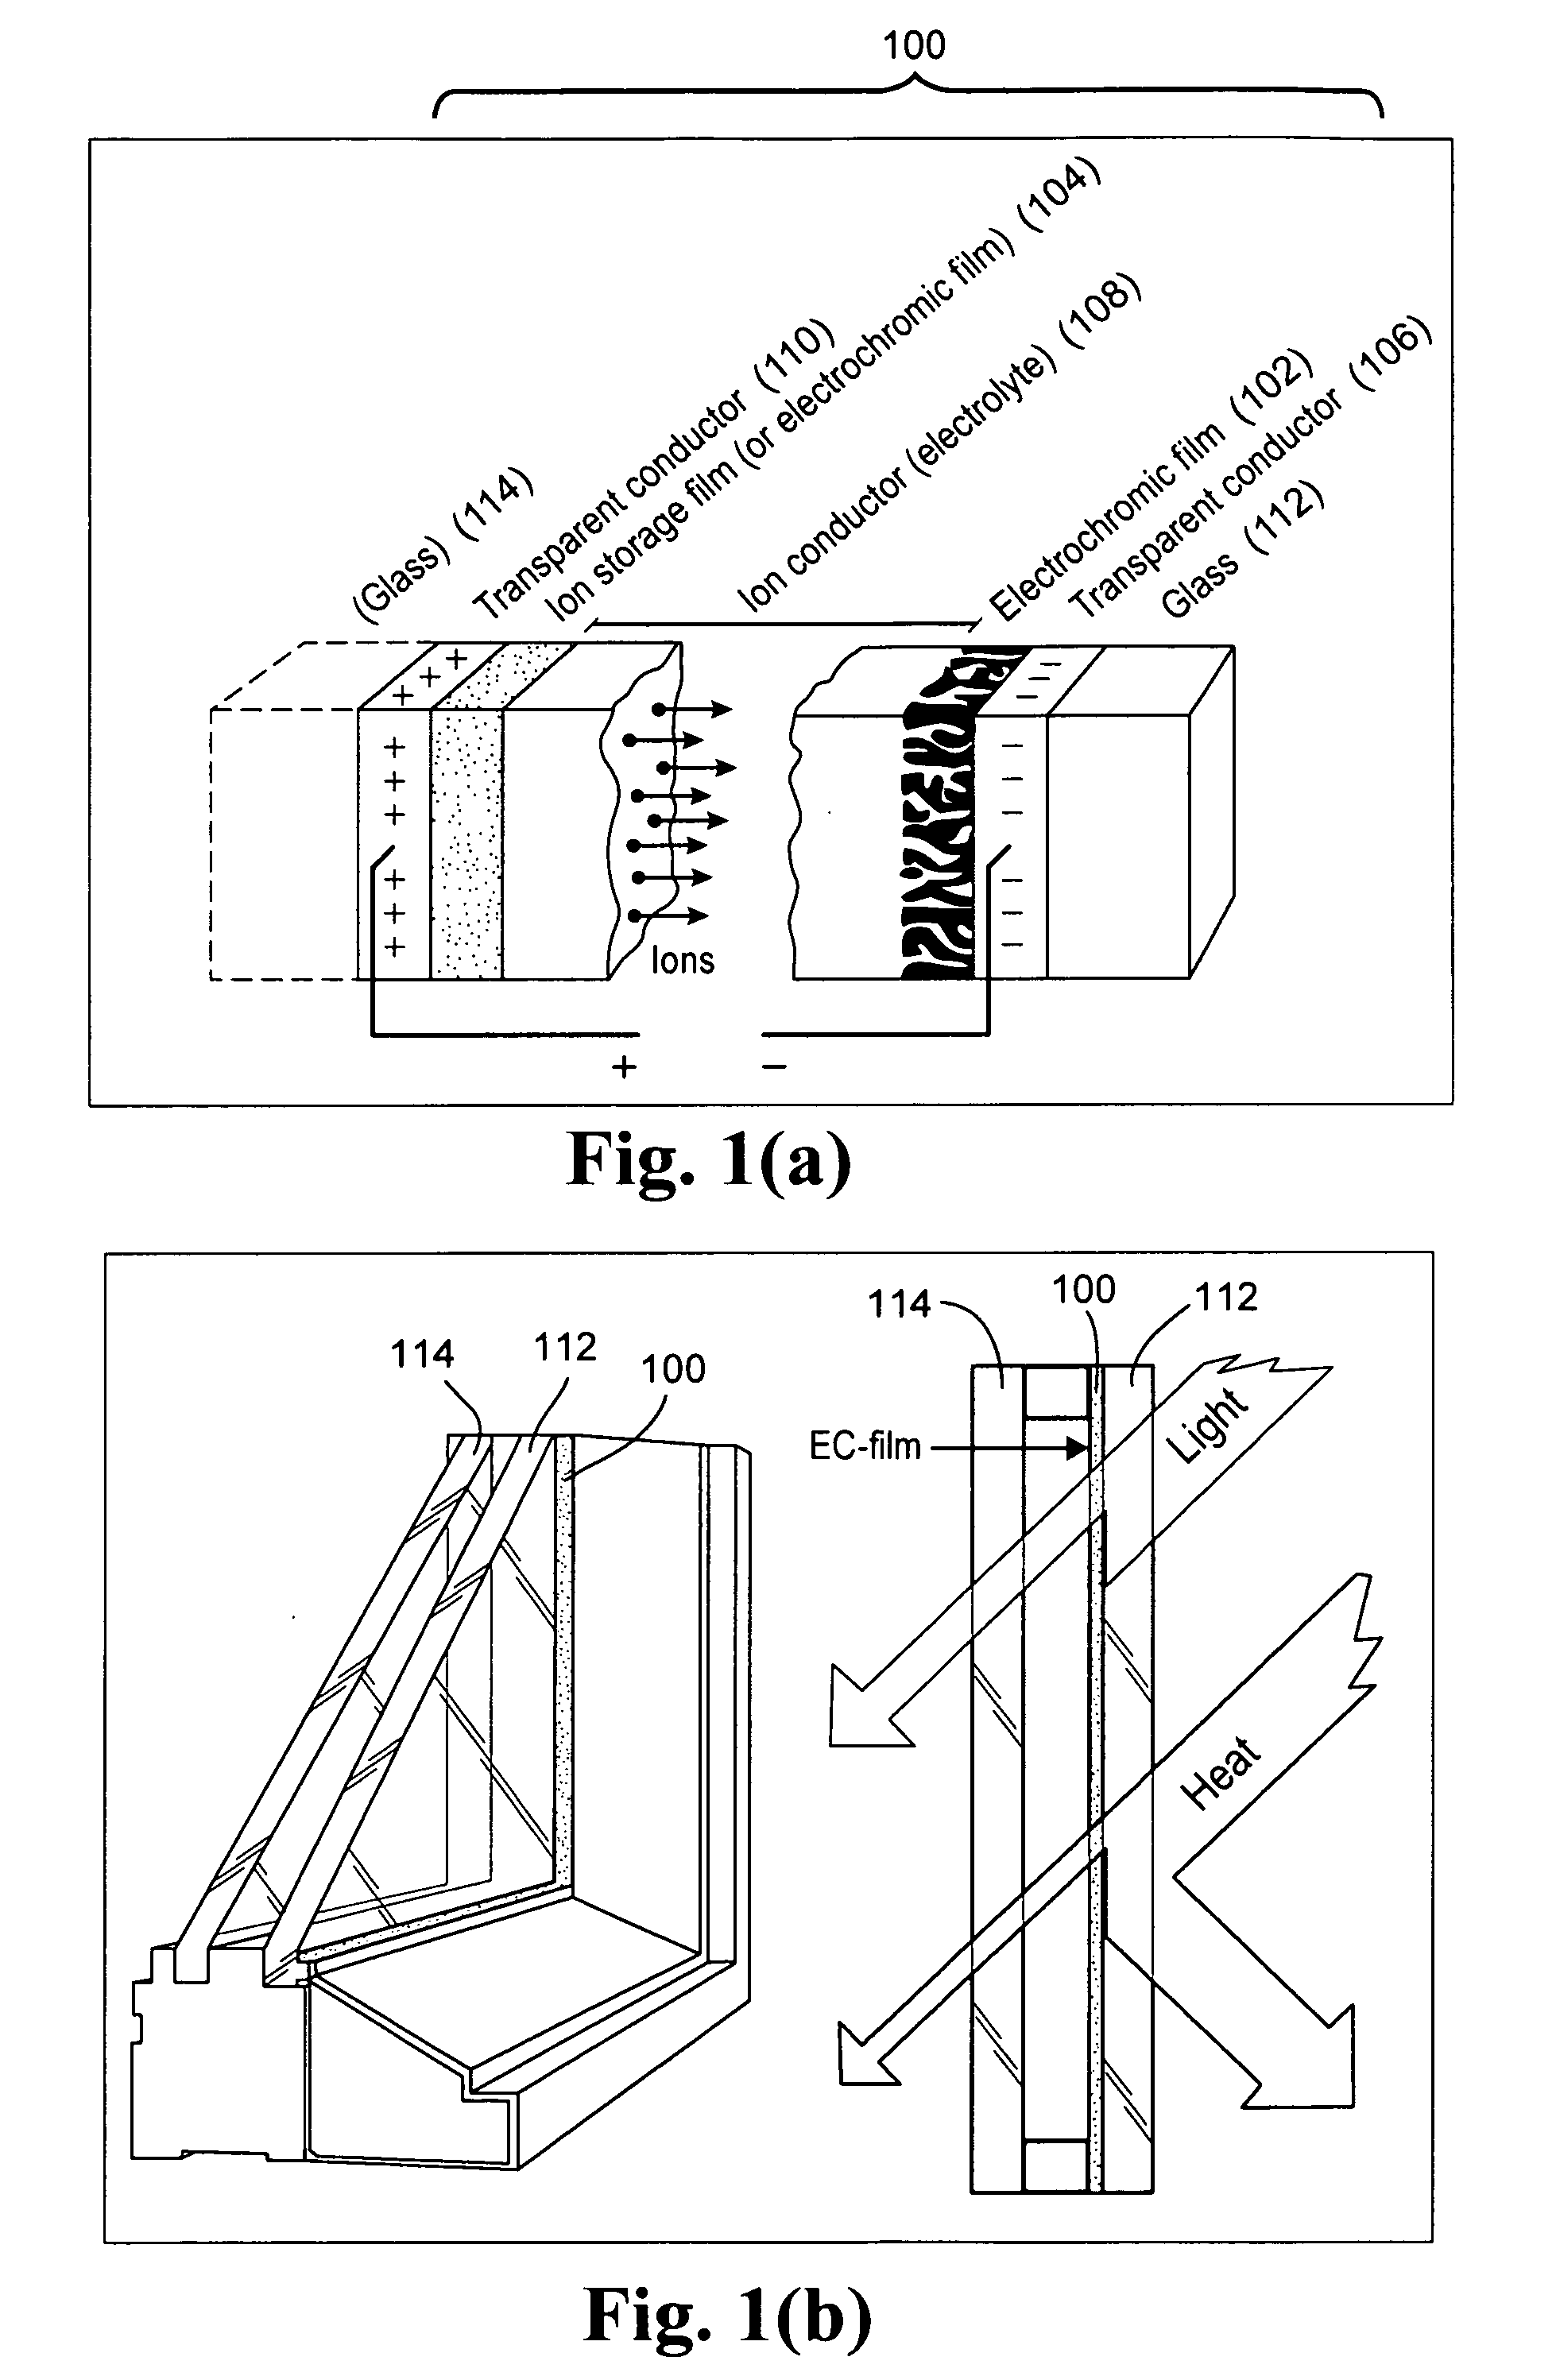 Electrochromic devices, assemblies incorporating electrochromic devices, and/or methods of making the same